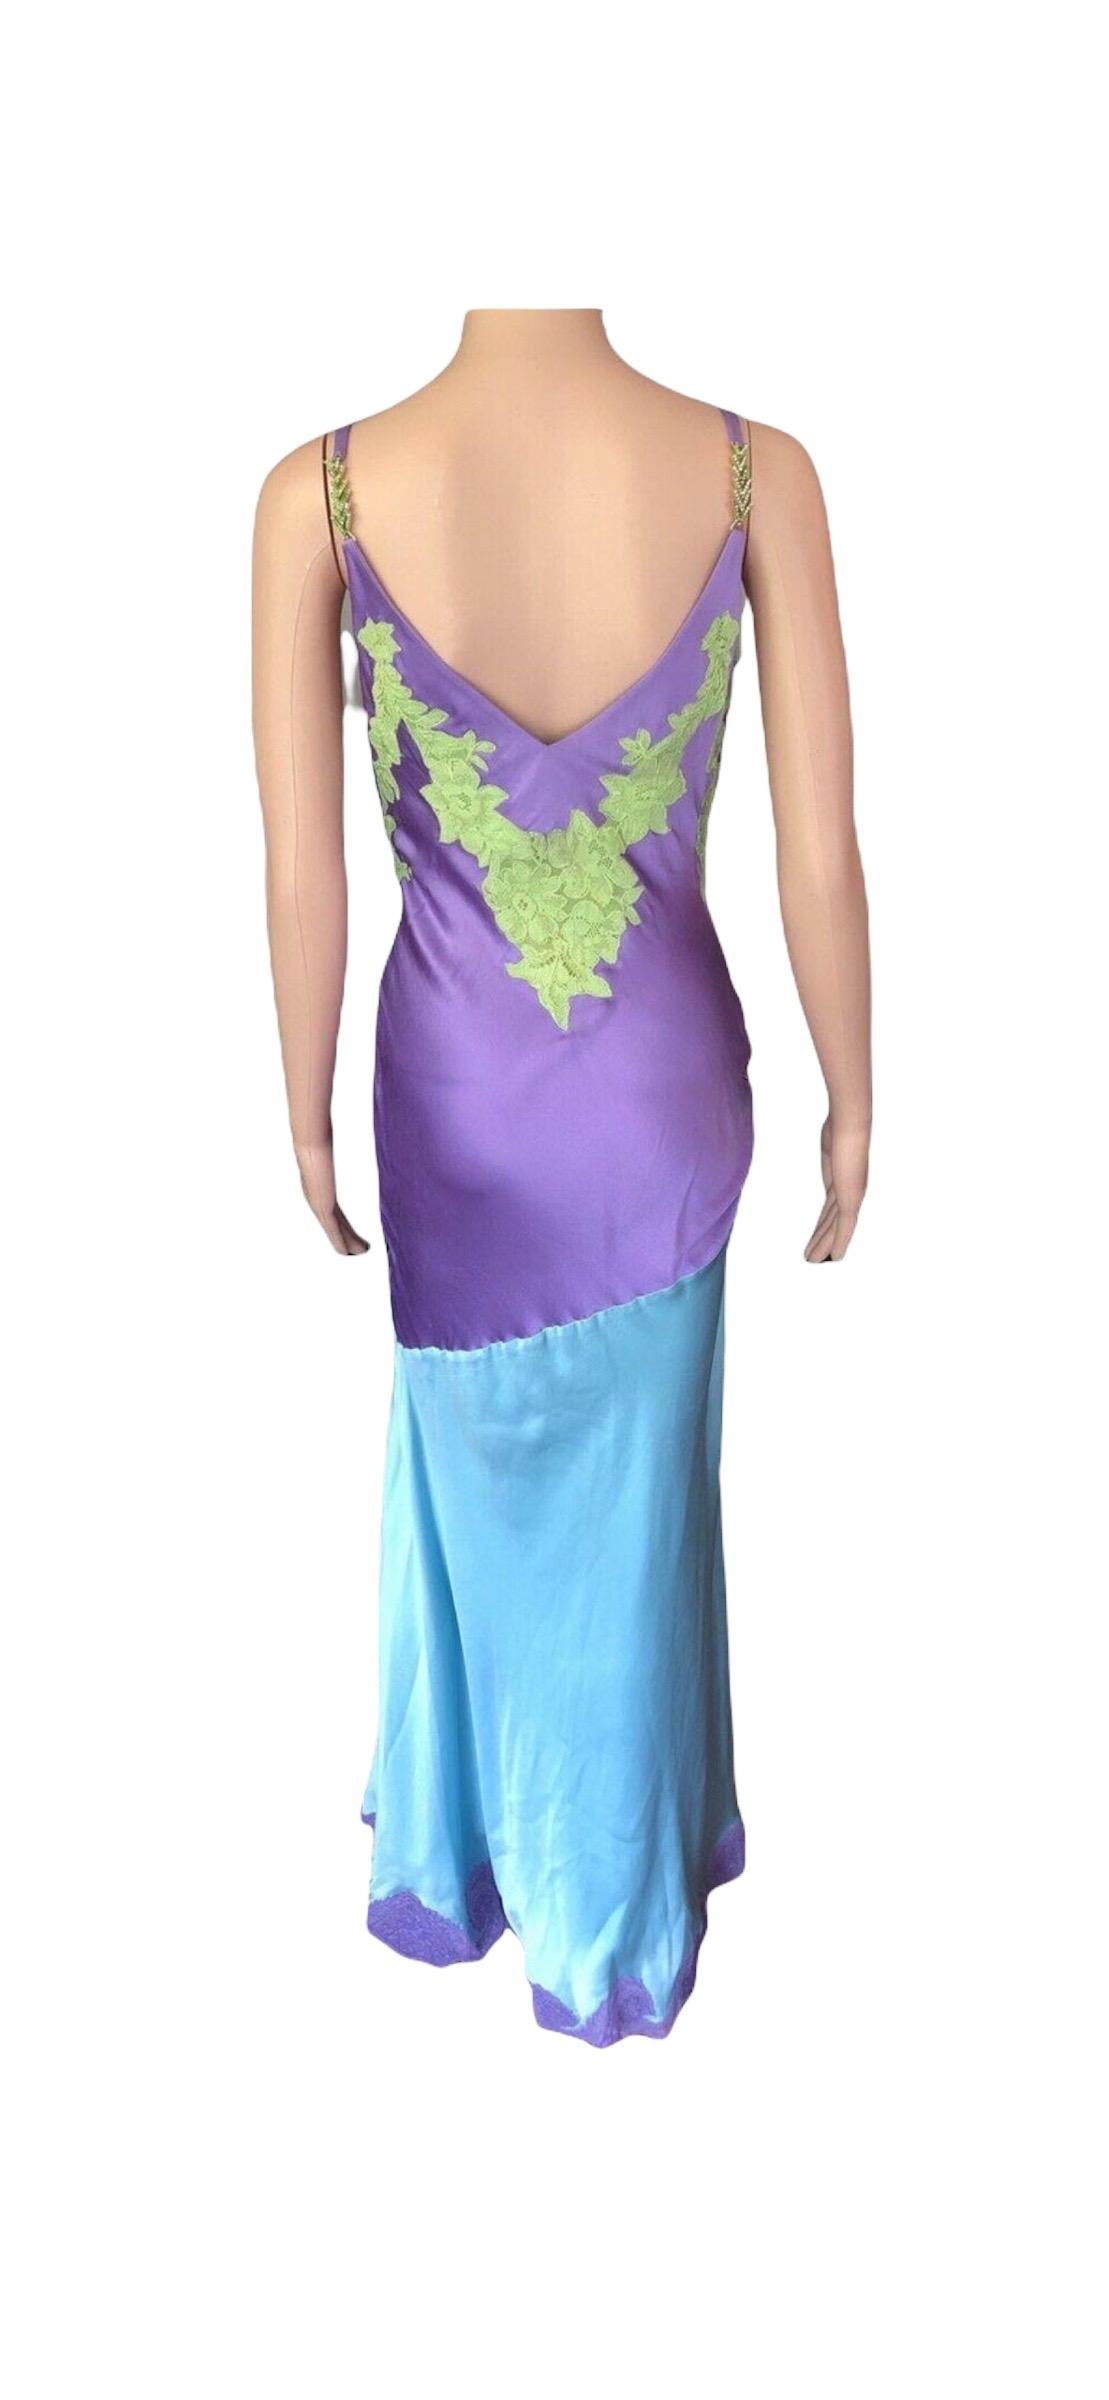 Gianni Versace F/W 1996 Runway Vintage Iconic Silk Dress Gown  For Sale 4